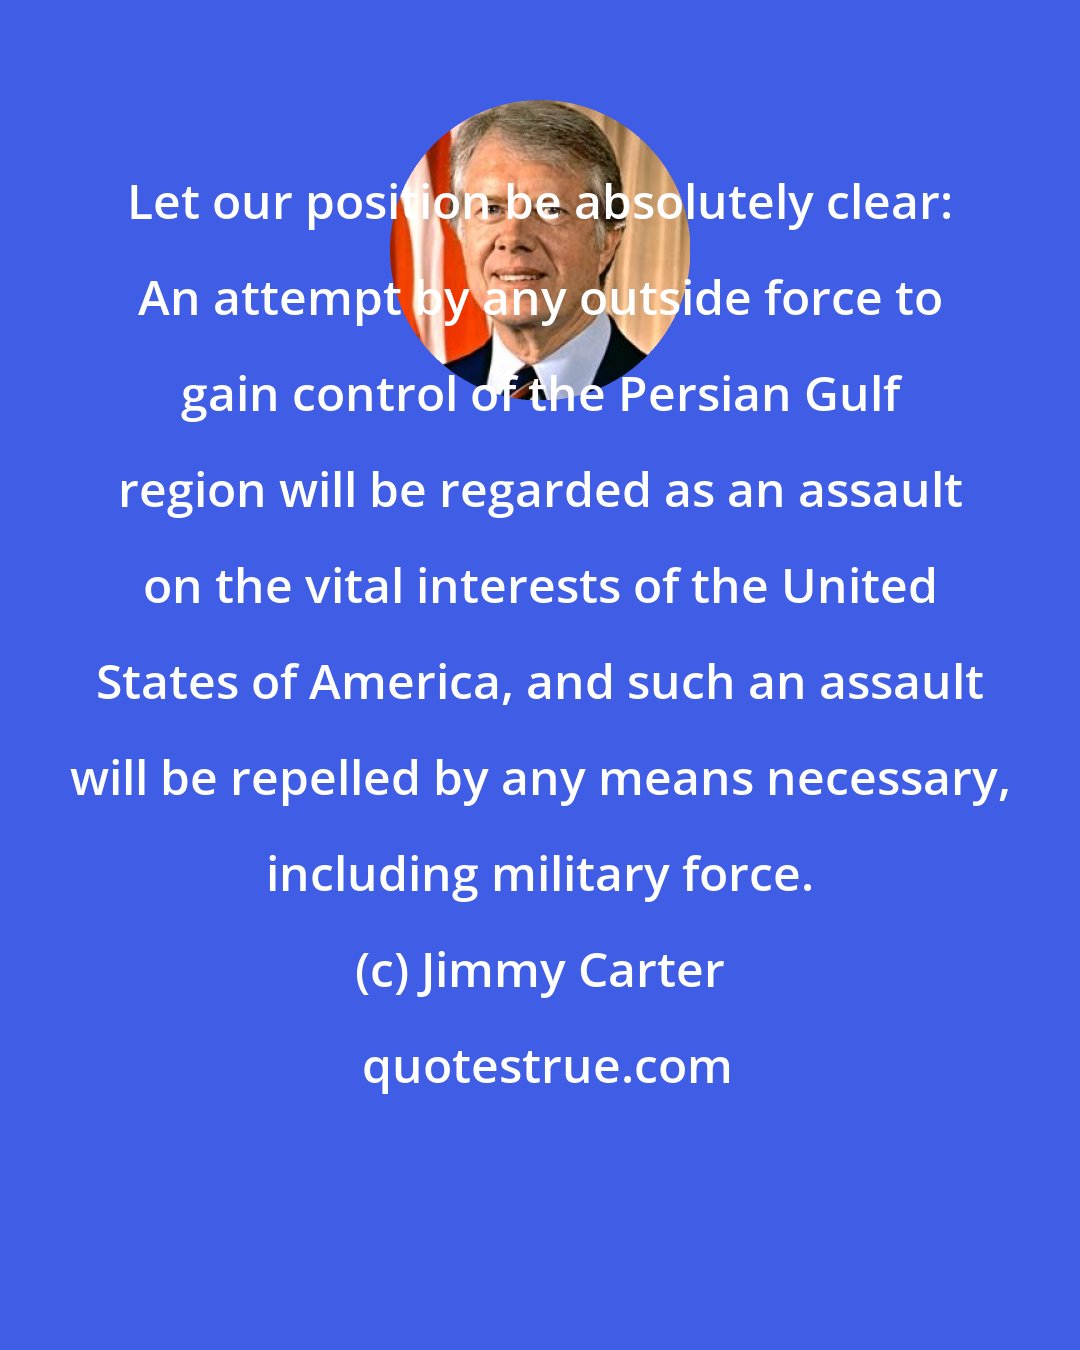 Jimmy Carter: Let our position be absolutely clear: An attempt by any outside force to gain control of the Persian Gulf region will be regarded as an assault on the vital interests of the United States of America, and such an assault will be repelled by any means necessary, including military force.